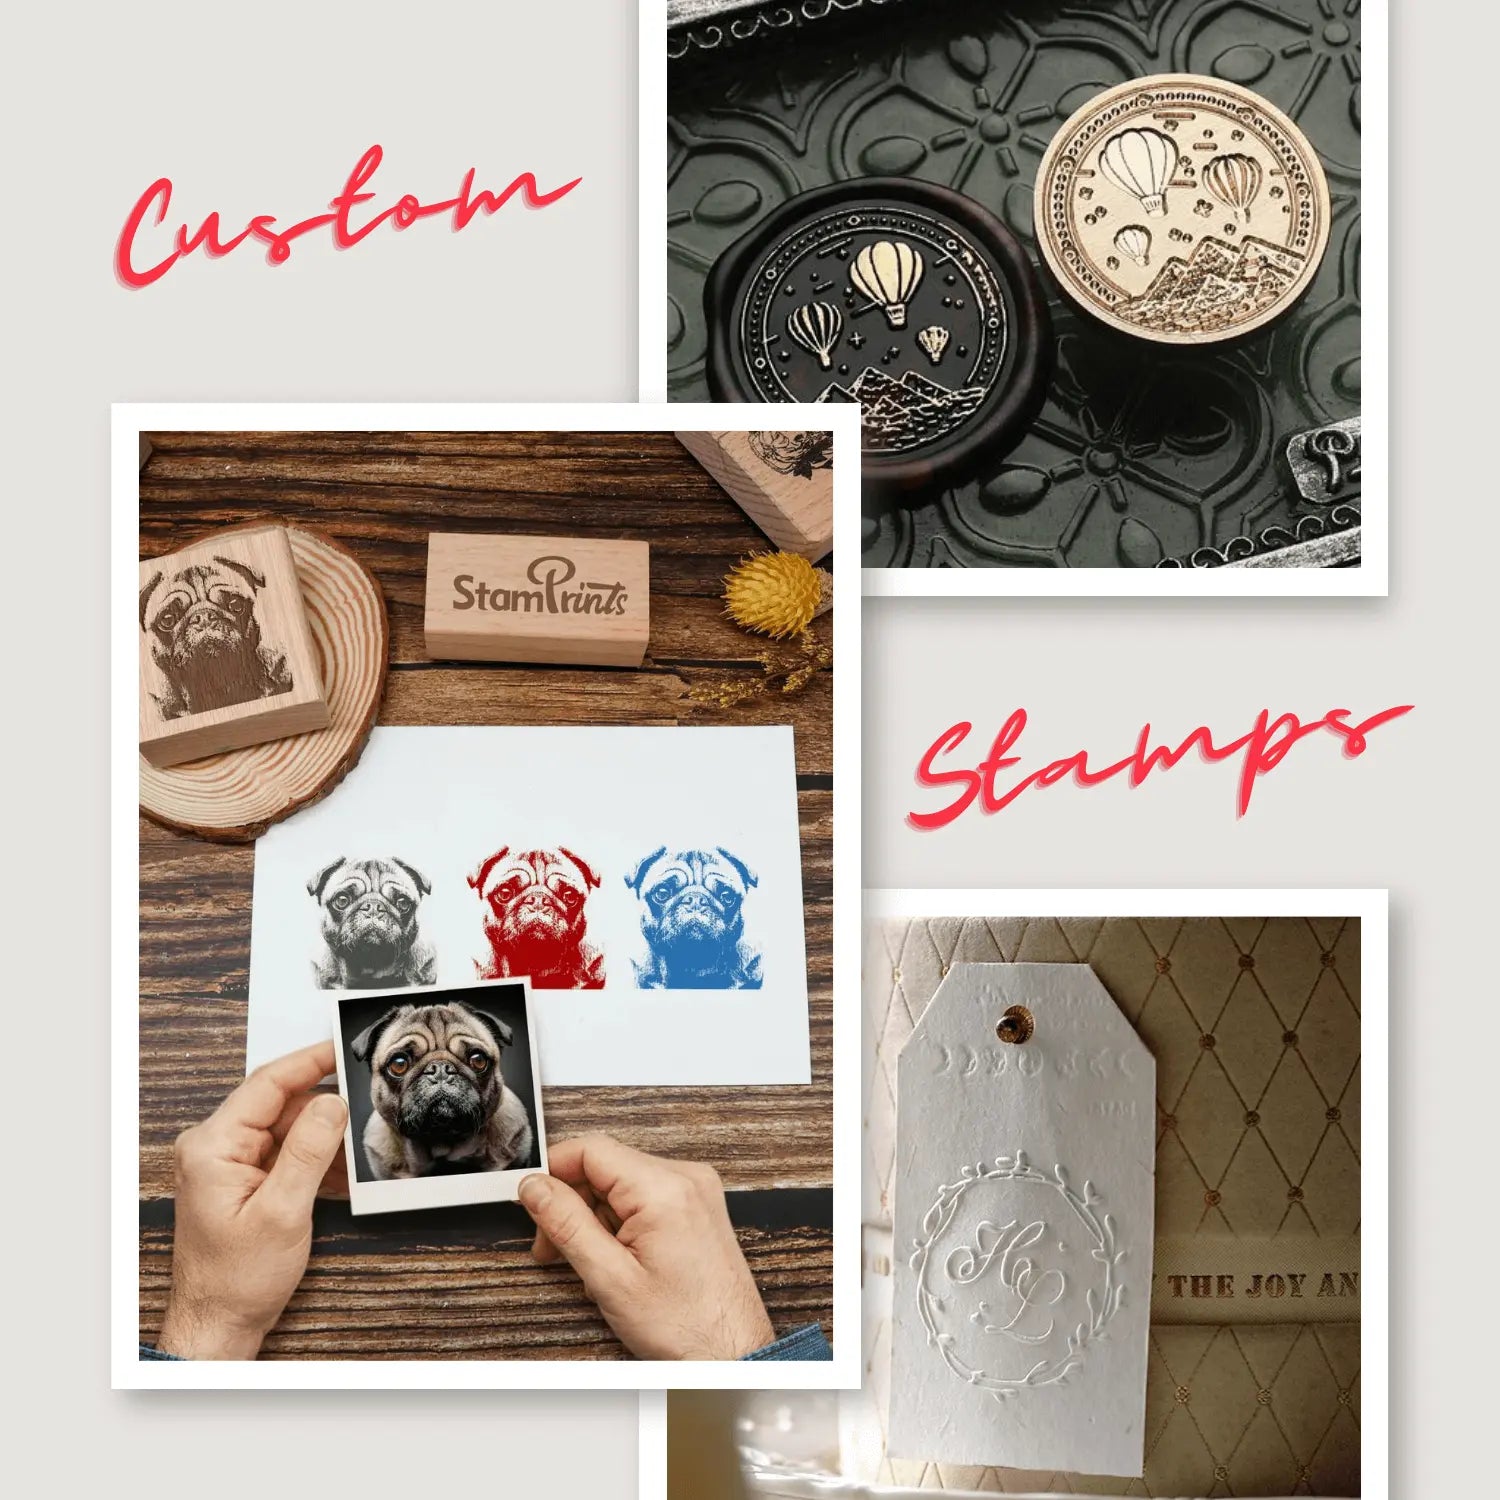 stamprints custom stamps - wax seal stamps, rubber stamps, embossers